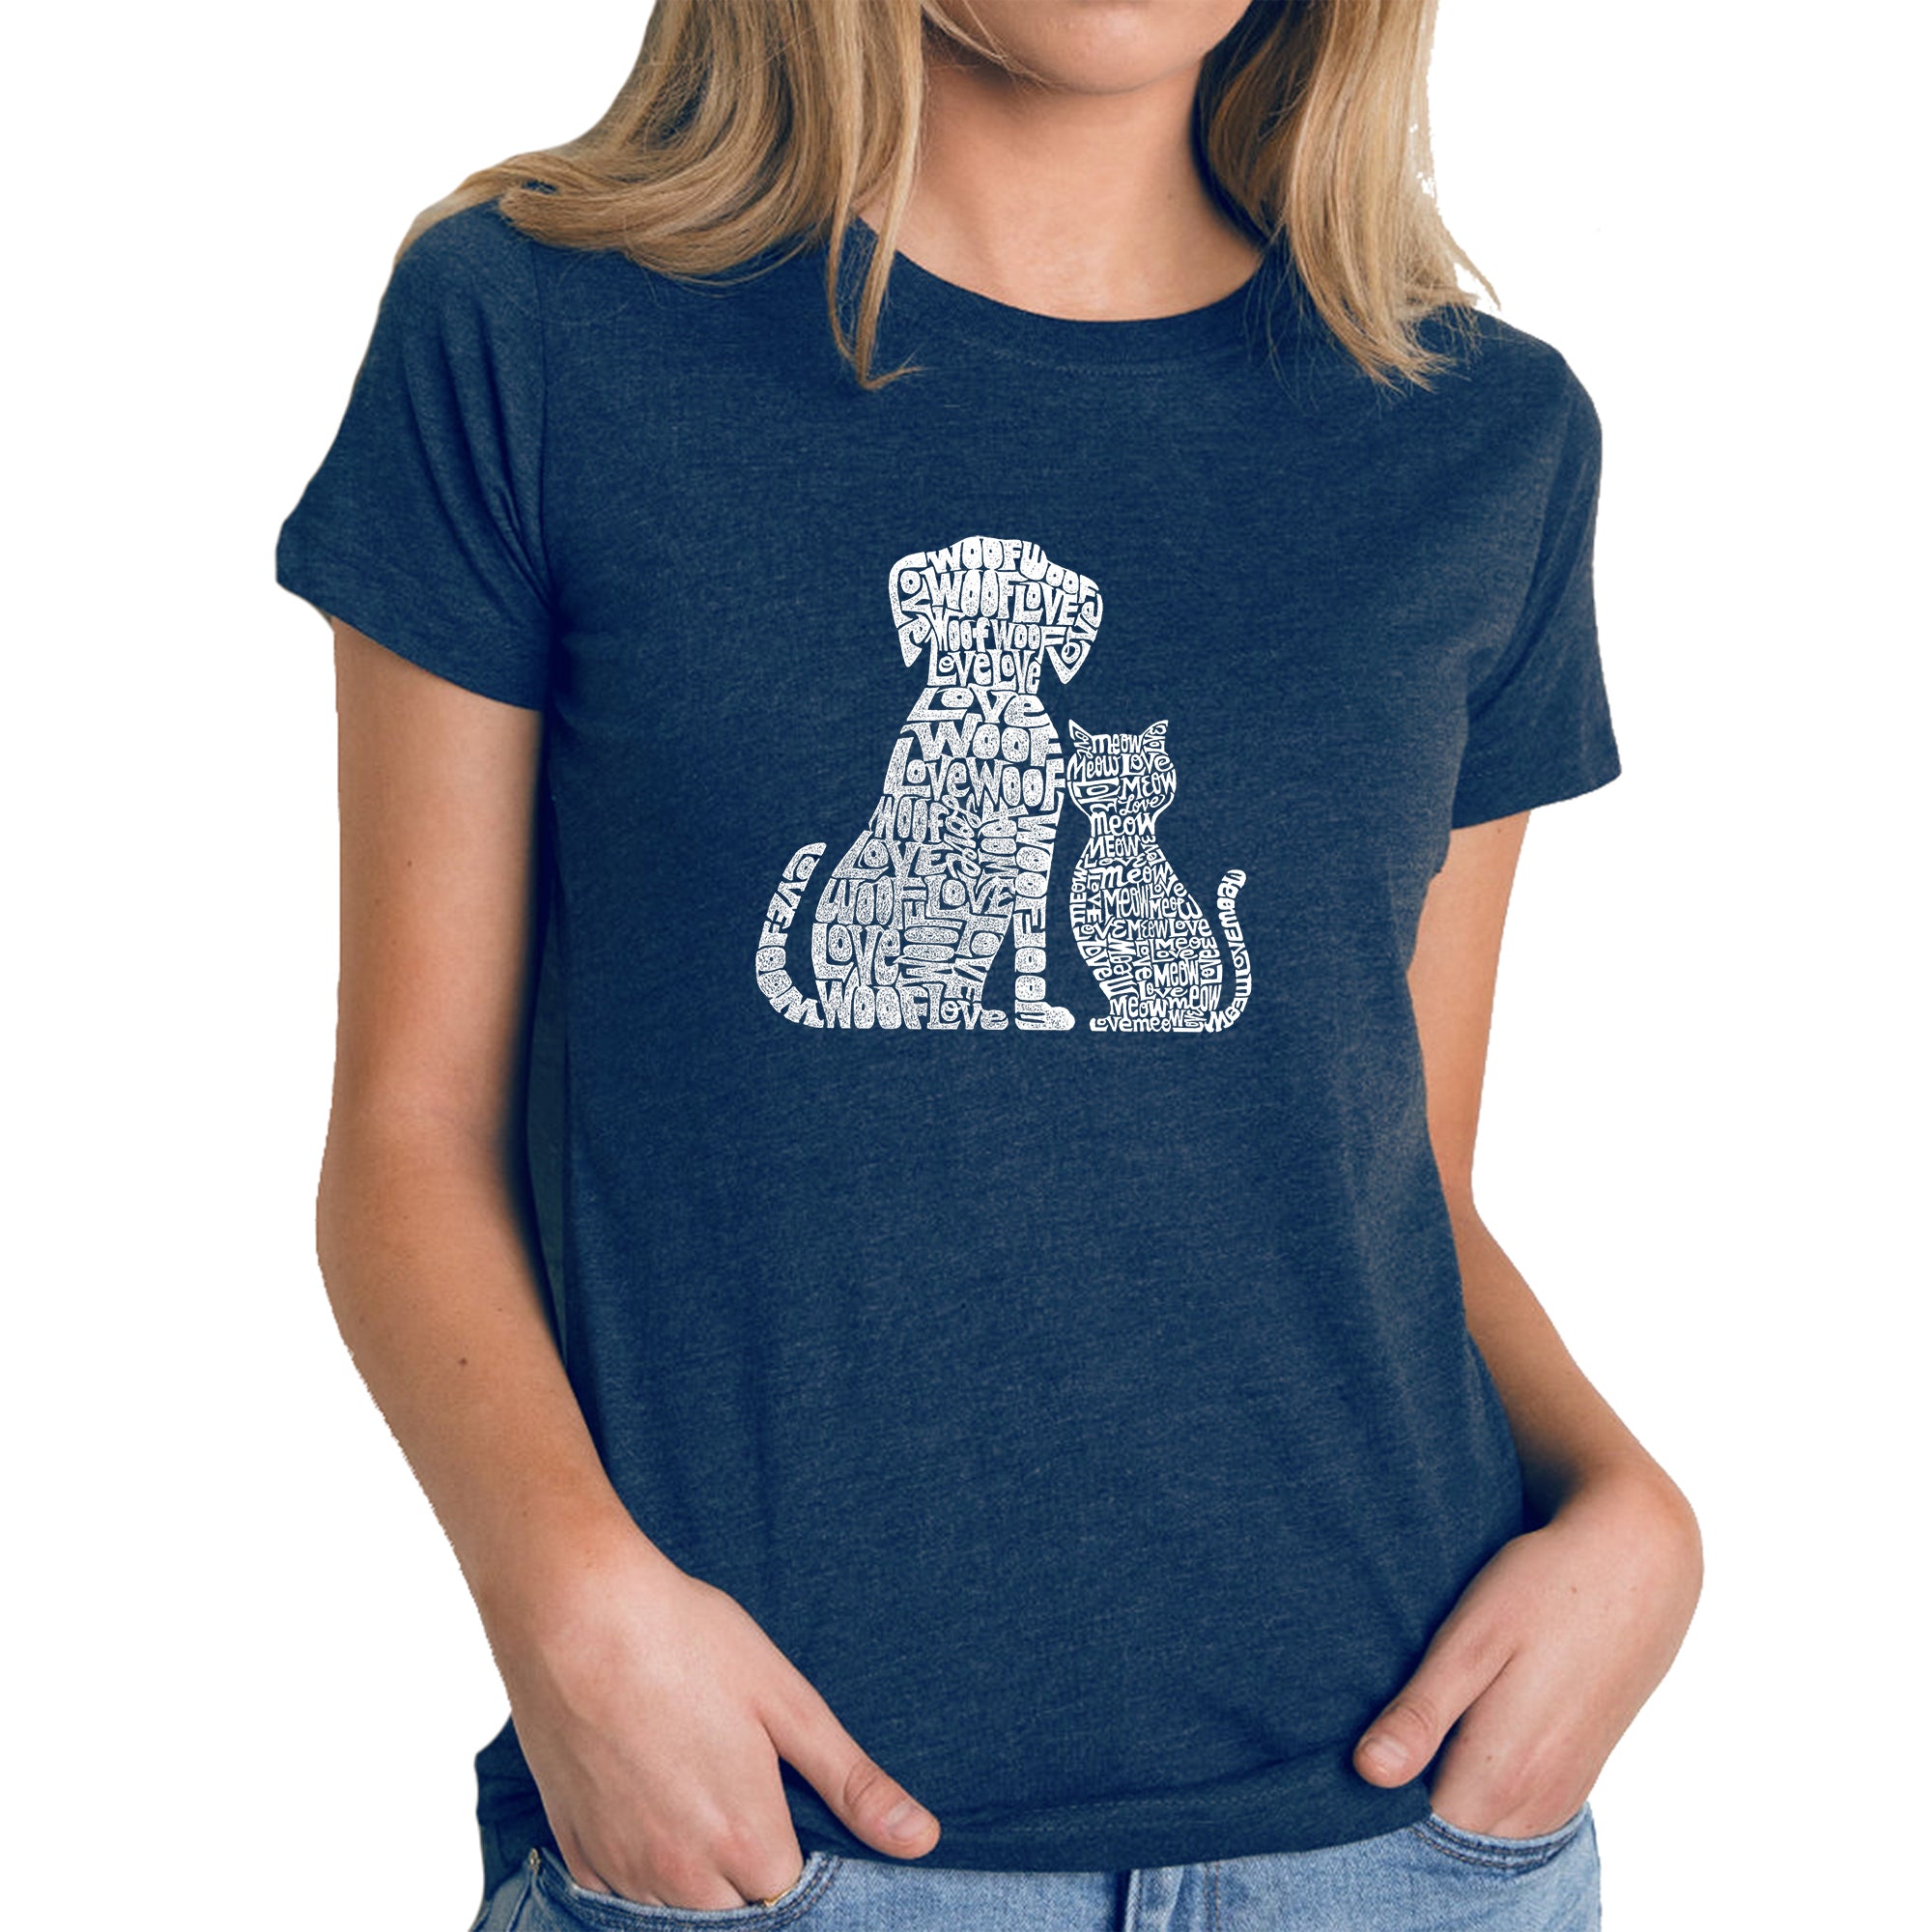 Dogs And Cats - Women's Premium Blend Word Art T-Shirt - Navy - Small